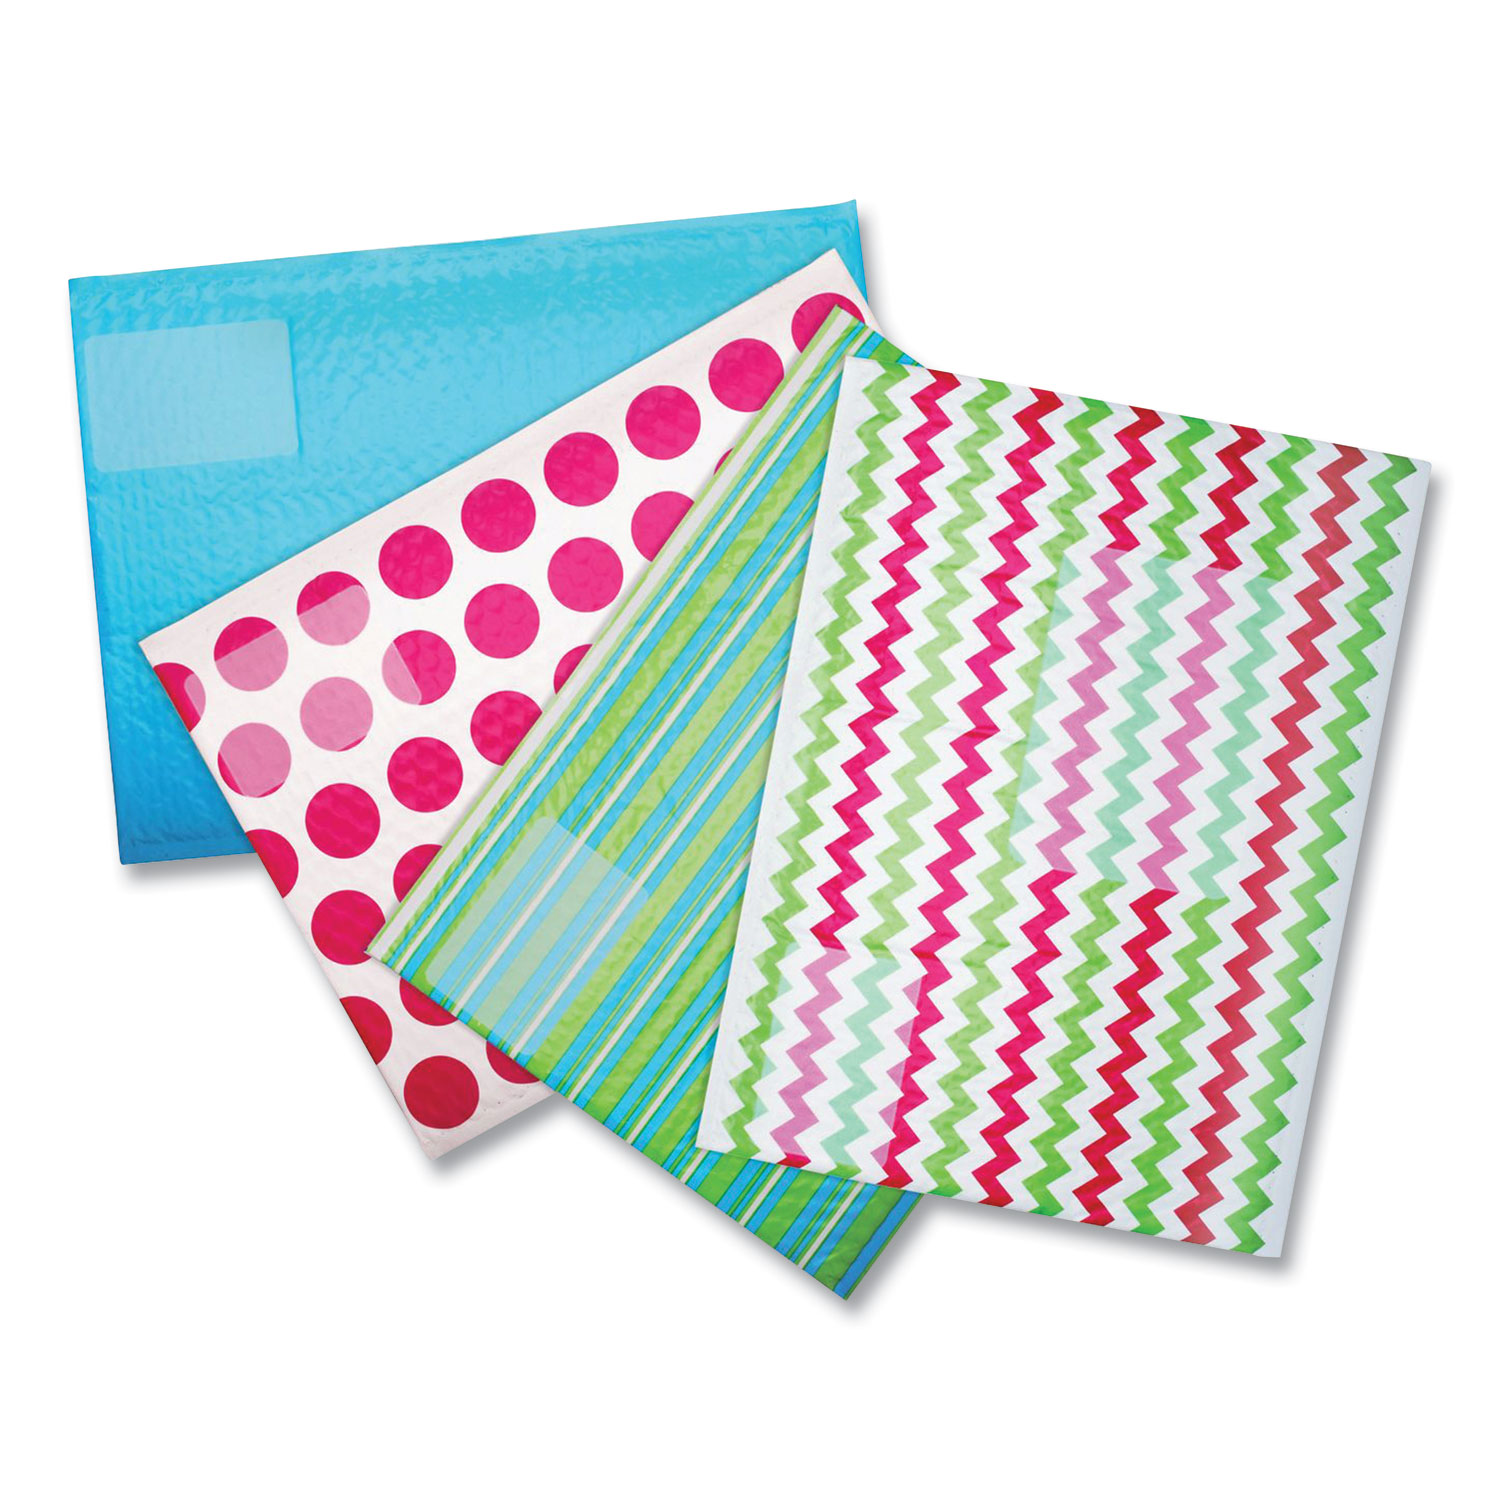  Scotch 8915-DS Decorative Plastic Bubble Mailer, #5, Bubble Lining, Self-Adhesive Closure, 10.5 x 15.25, Varying Multicolor Pattern (MMM392919) 